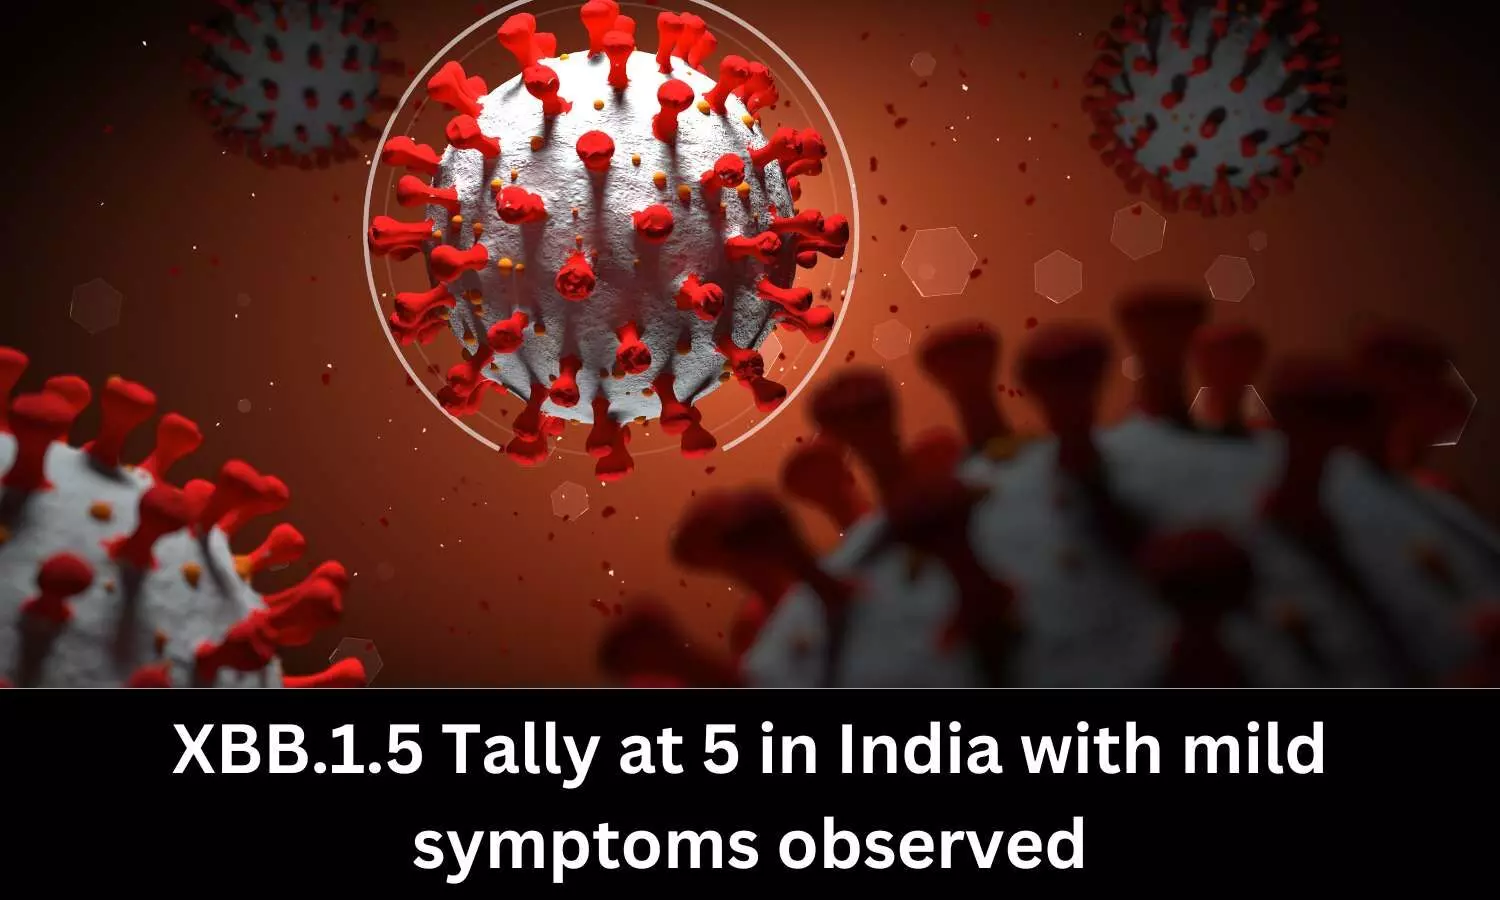 XBB.1.5 Tally at 5 in India with mild symptoms observed